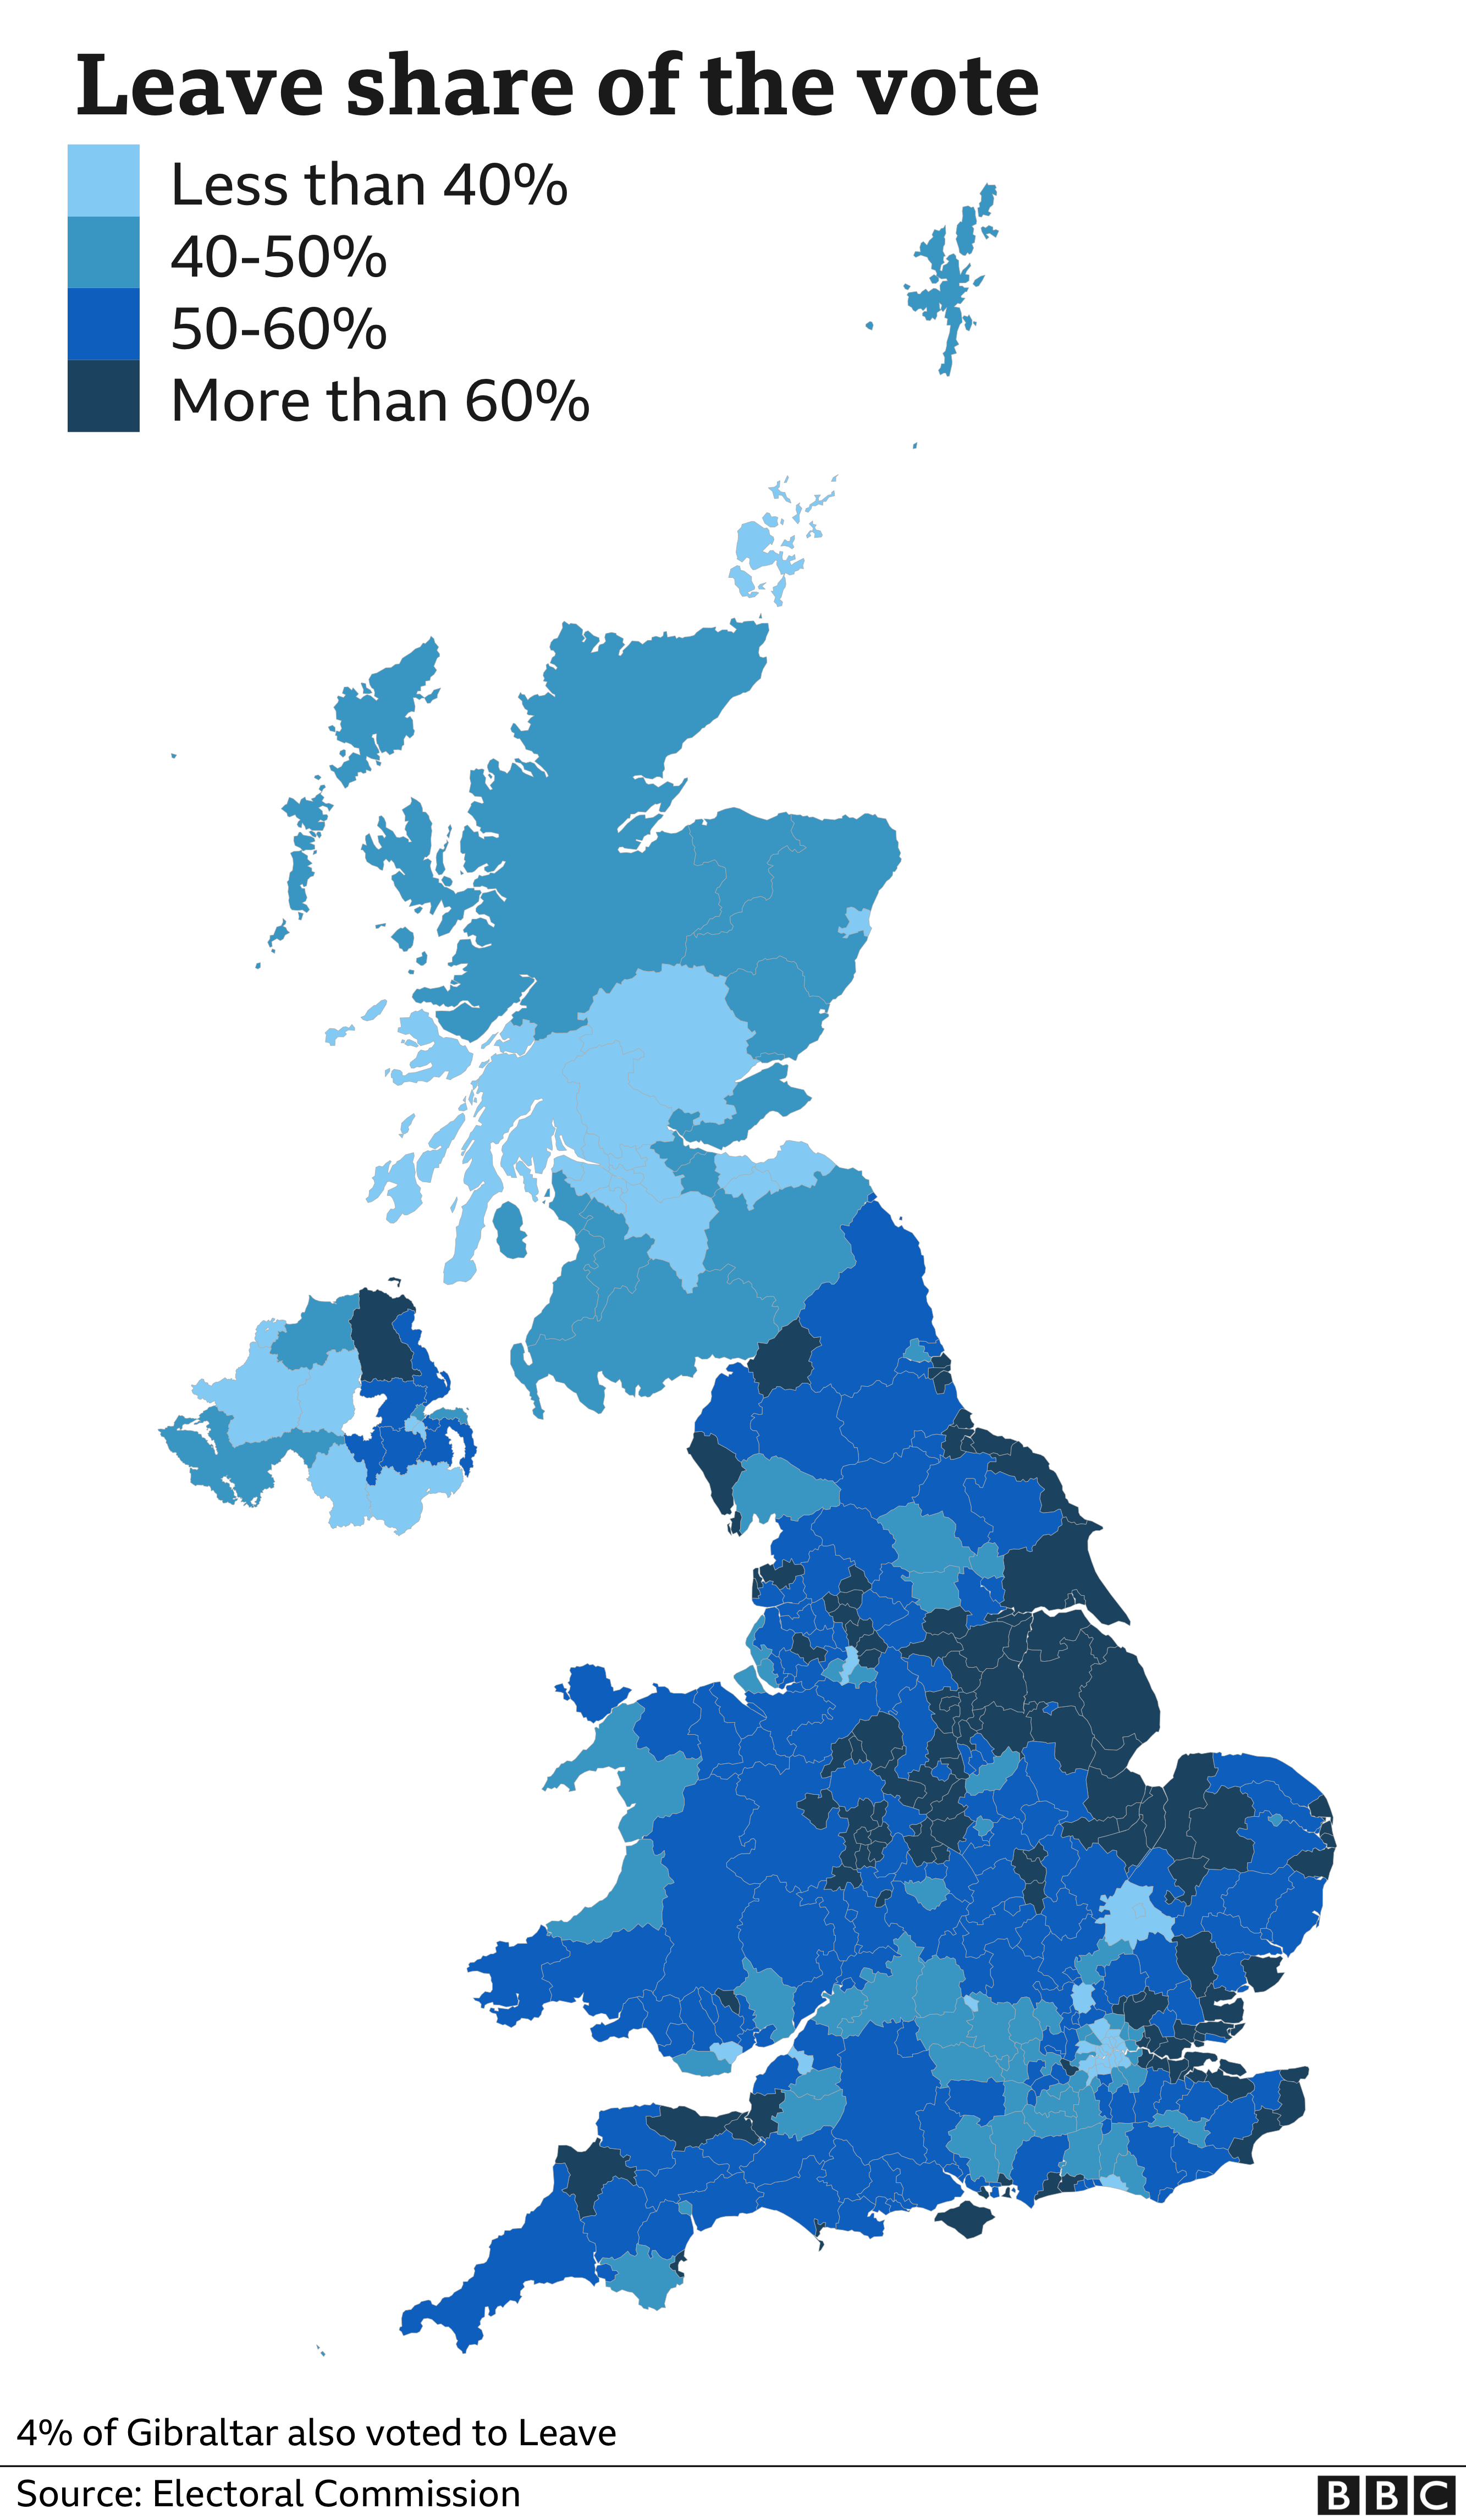 Leave share of the vote in each area